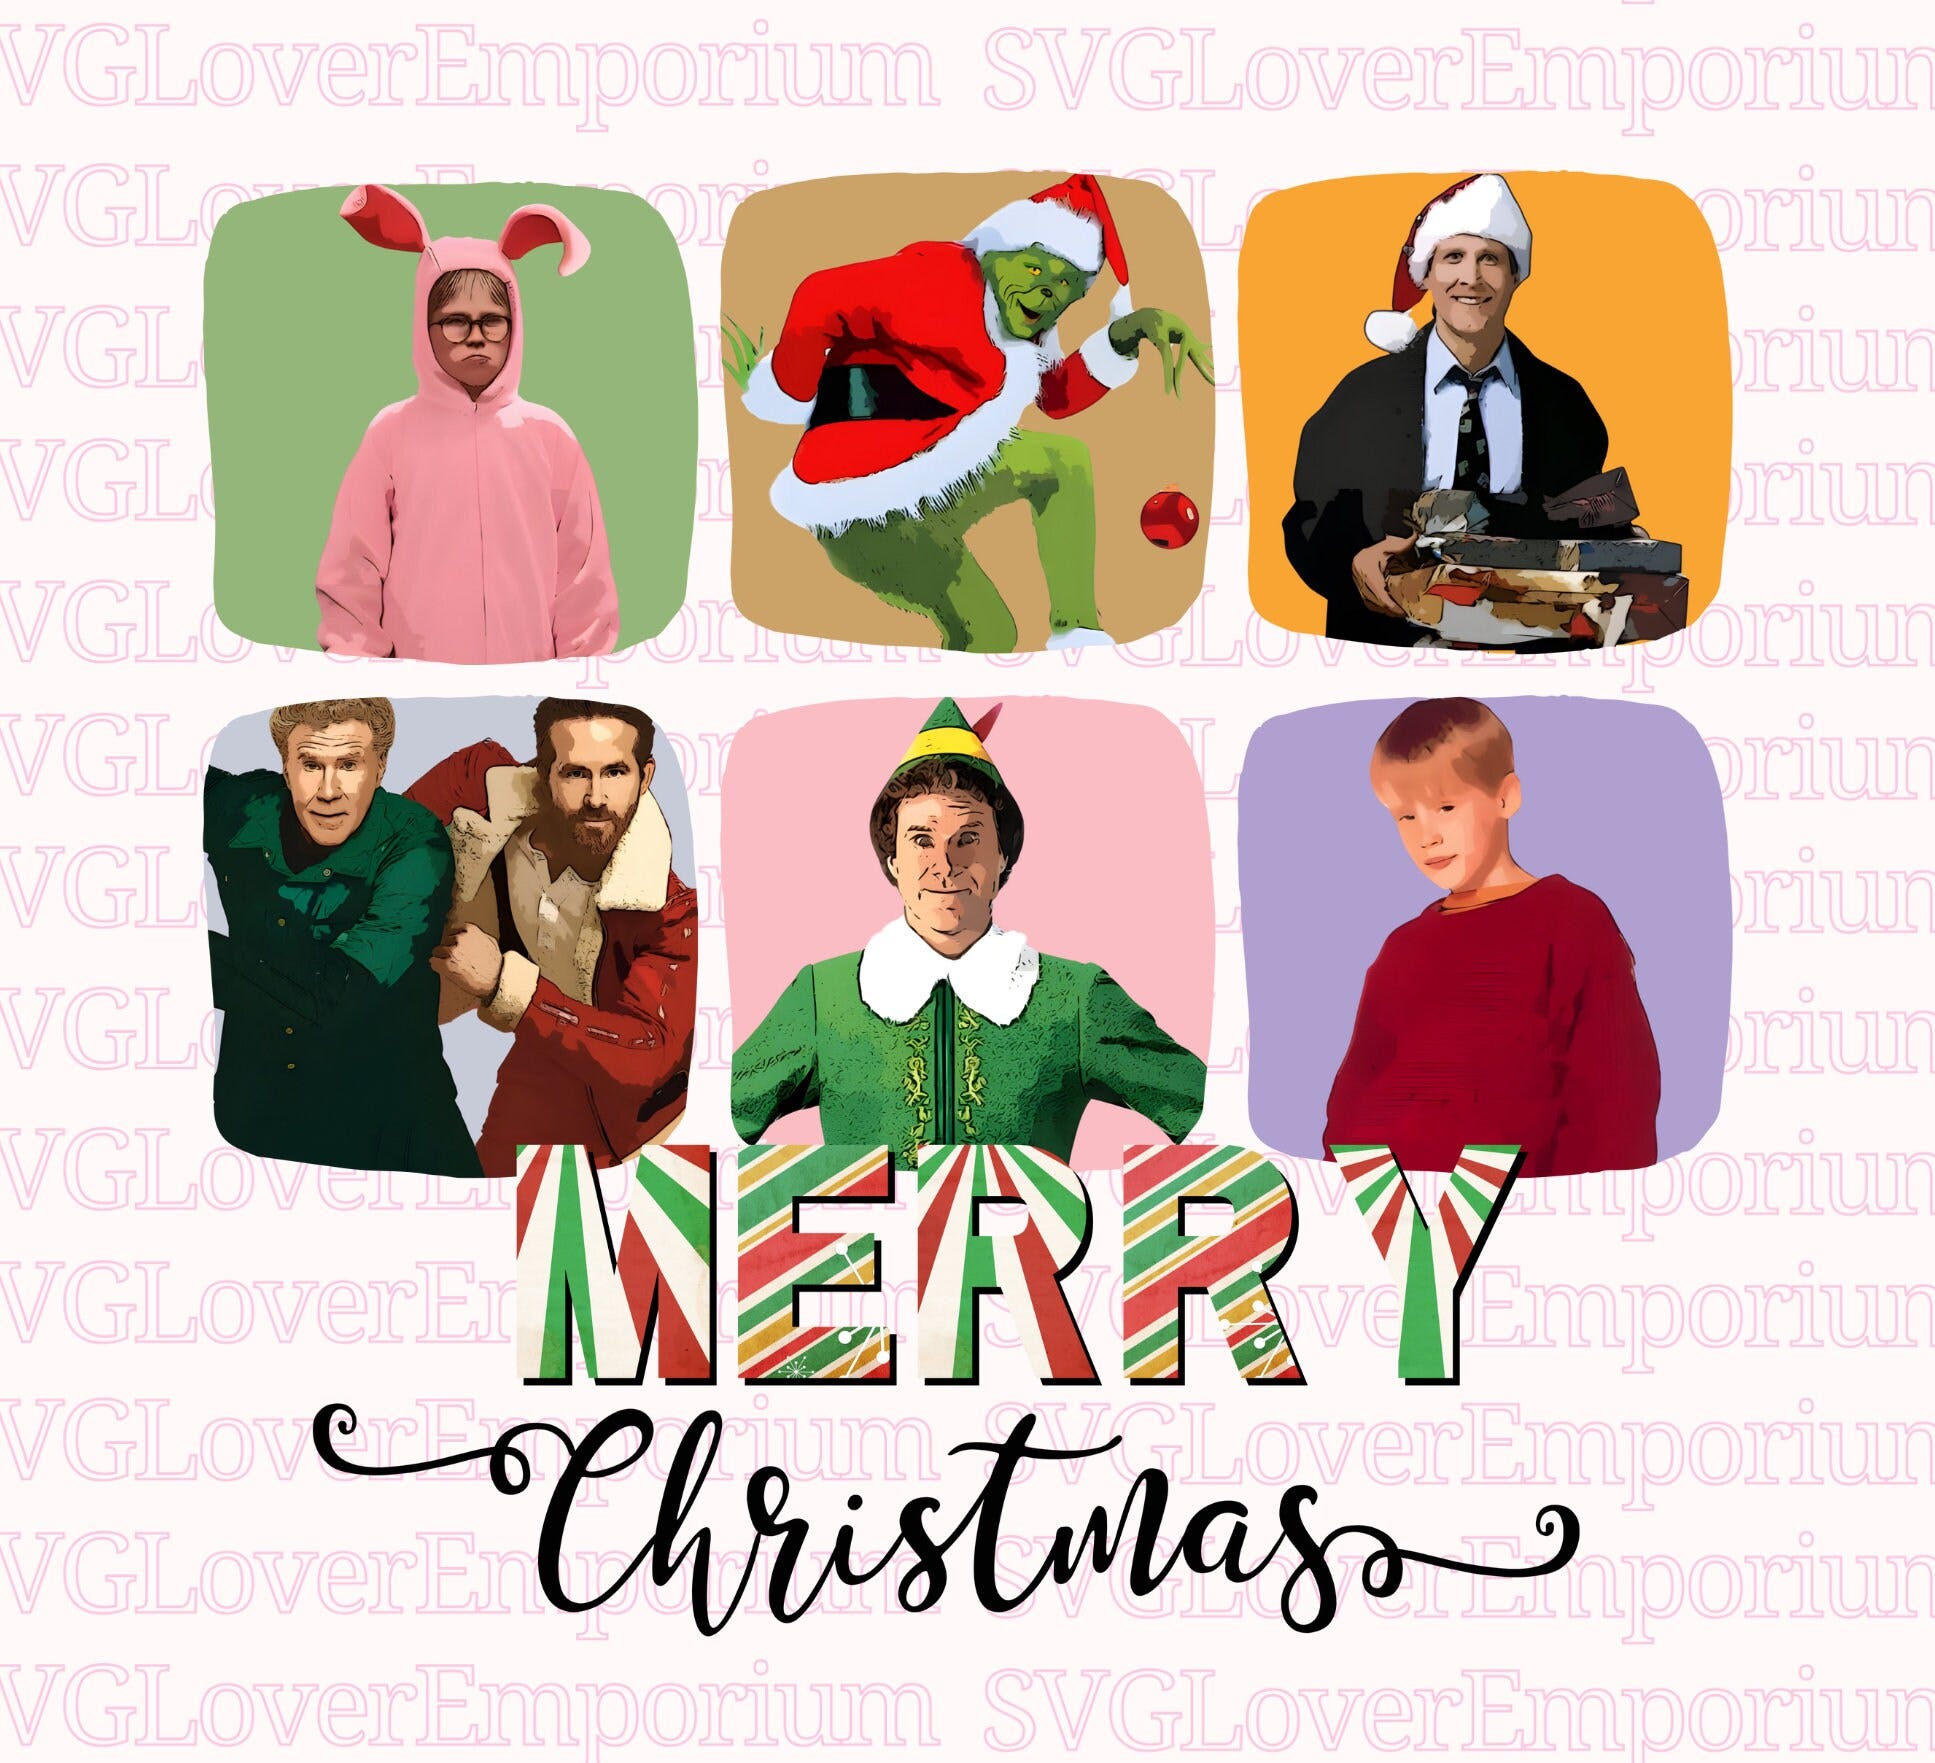 Merry Christmas Png, Christmas Friends Png, Christmas Movie Png, Funny Christmas Movie Character Png, Christmas Grich Character, Popular Png